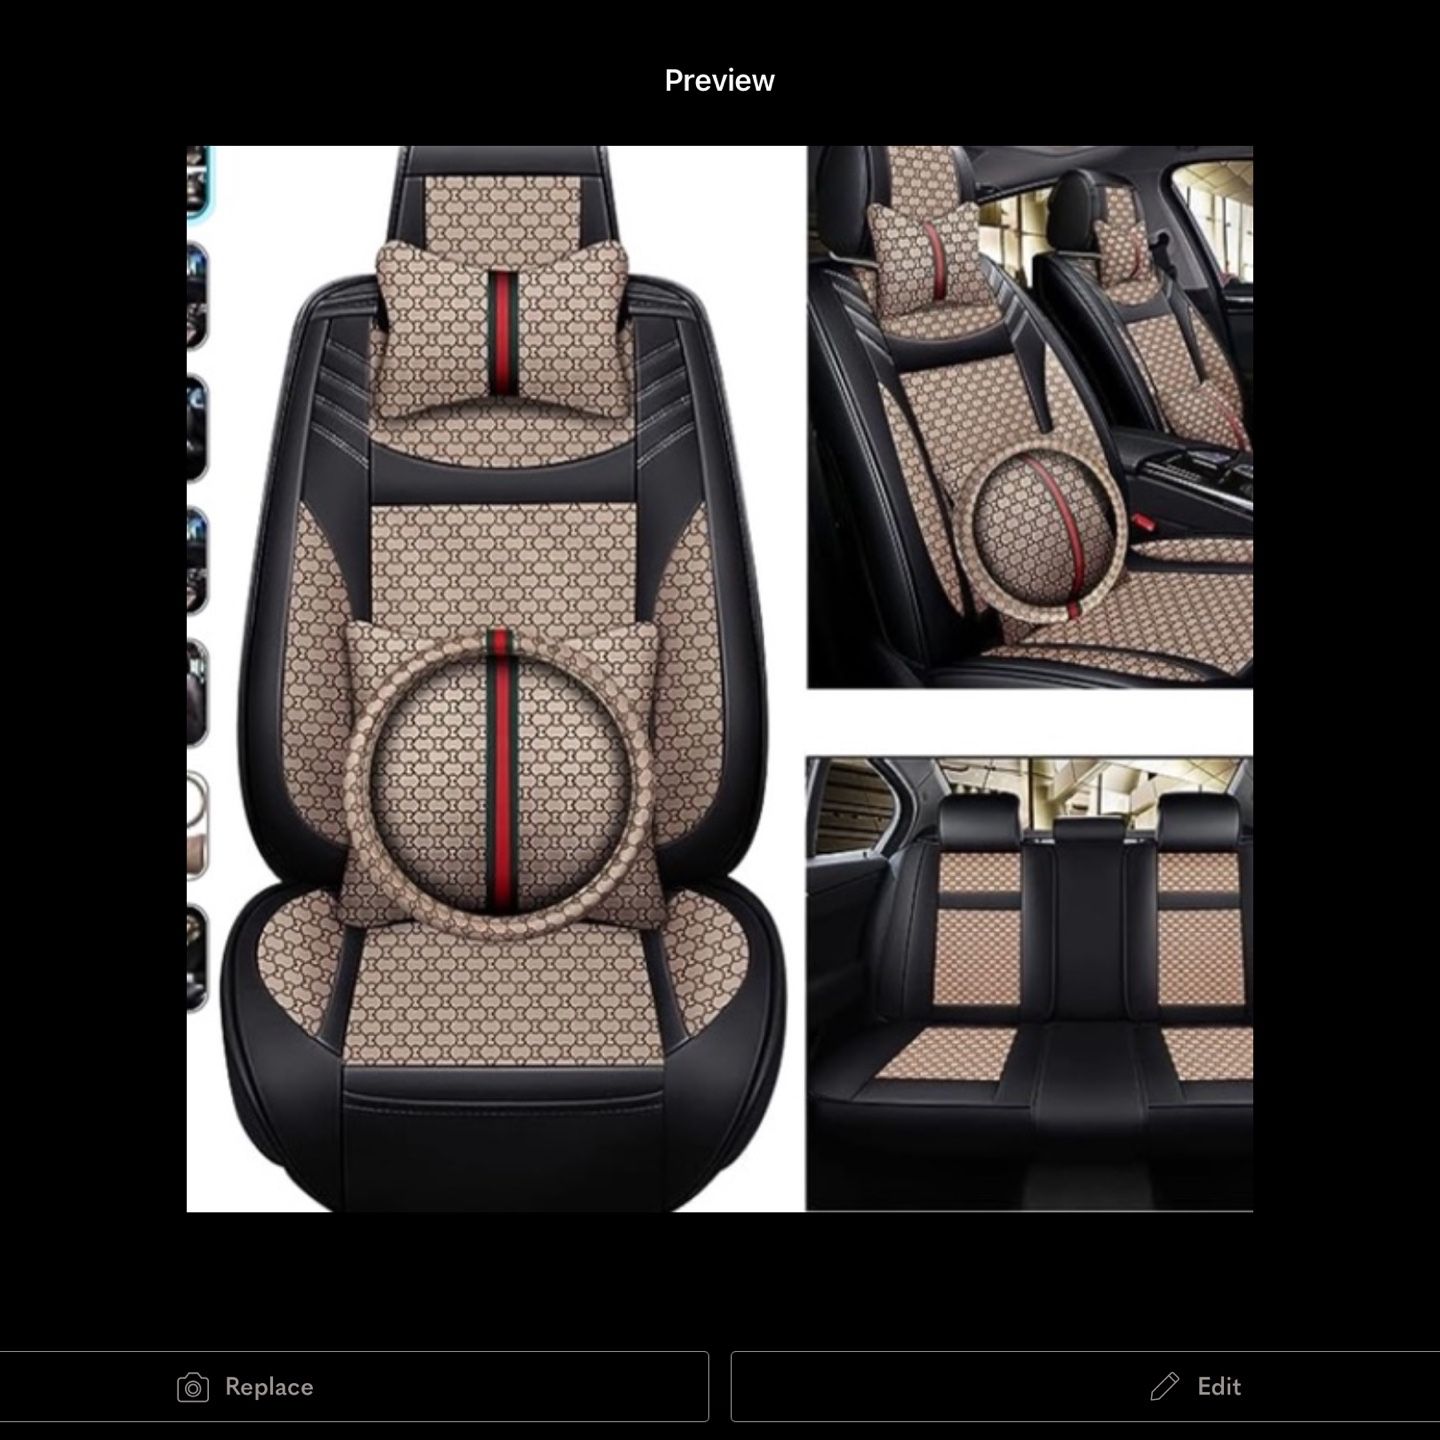 Gucci Chanel Lv Car Seat Cover Auto Accessories Others On Carou